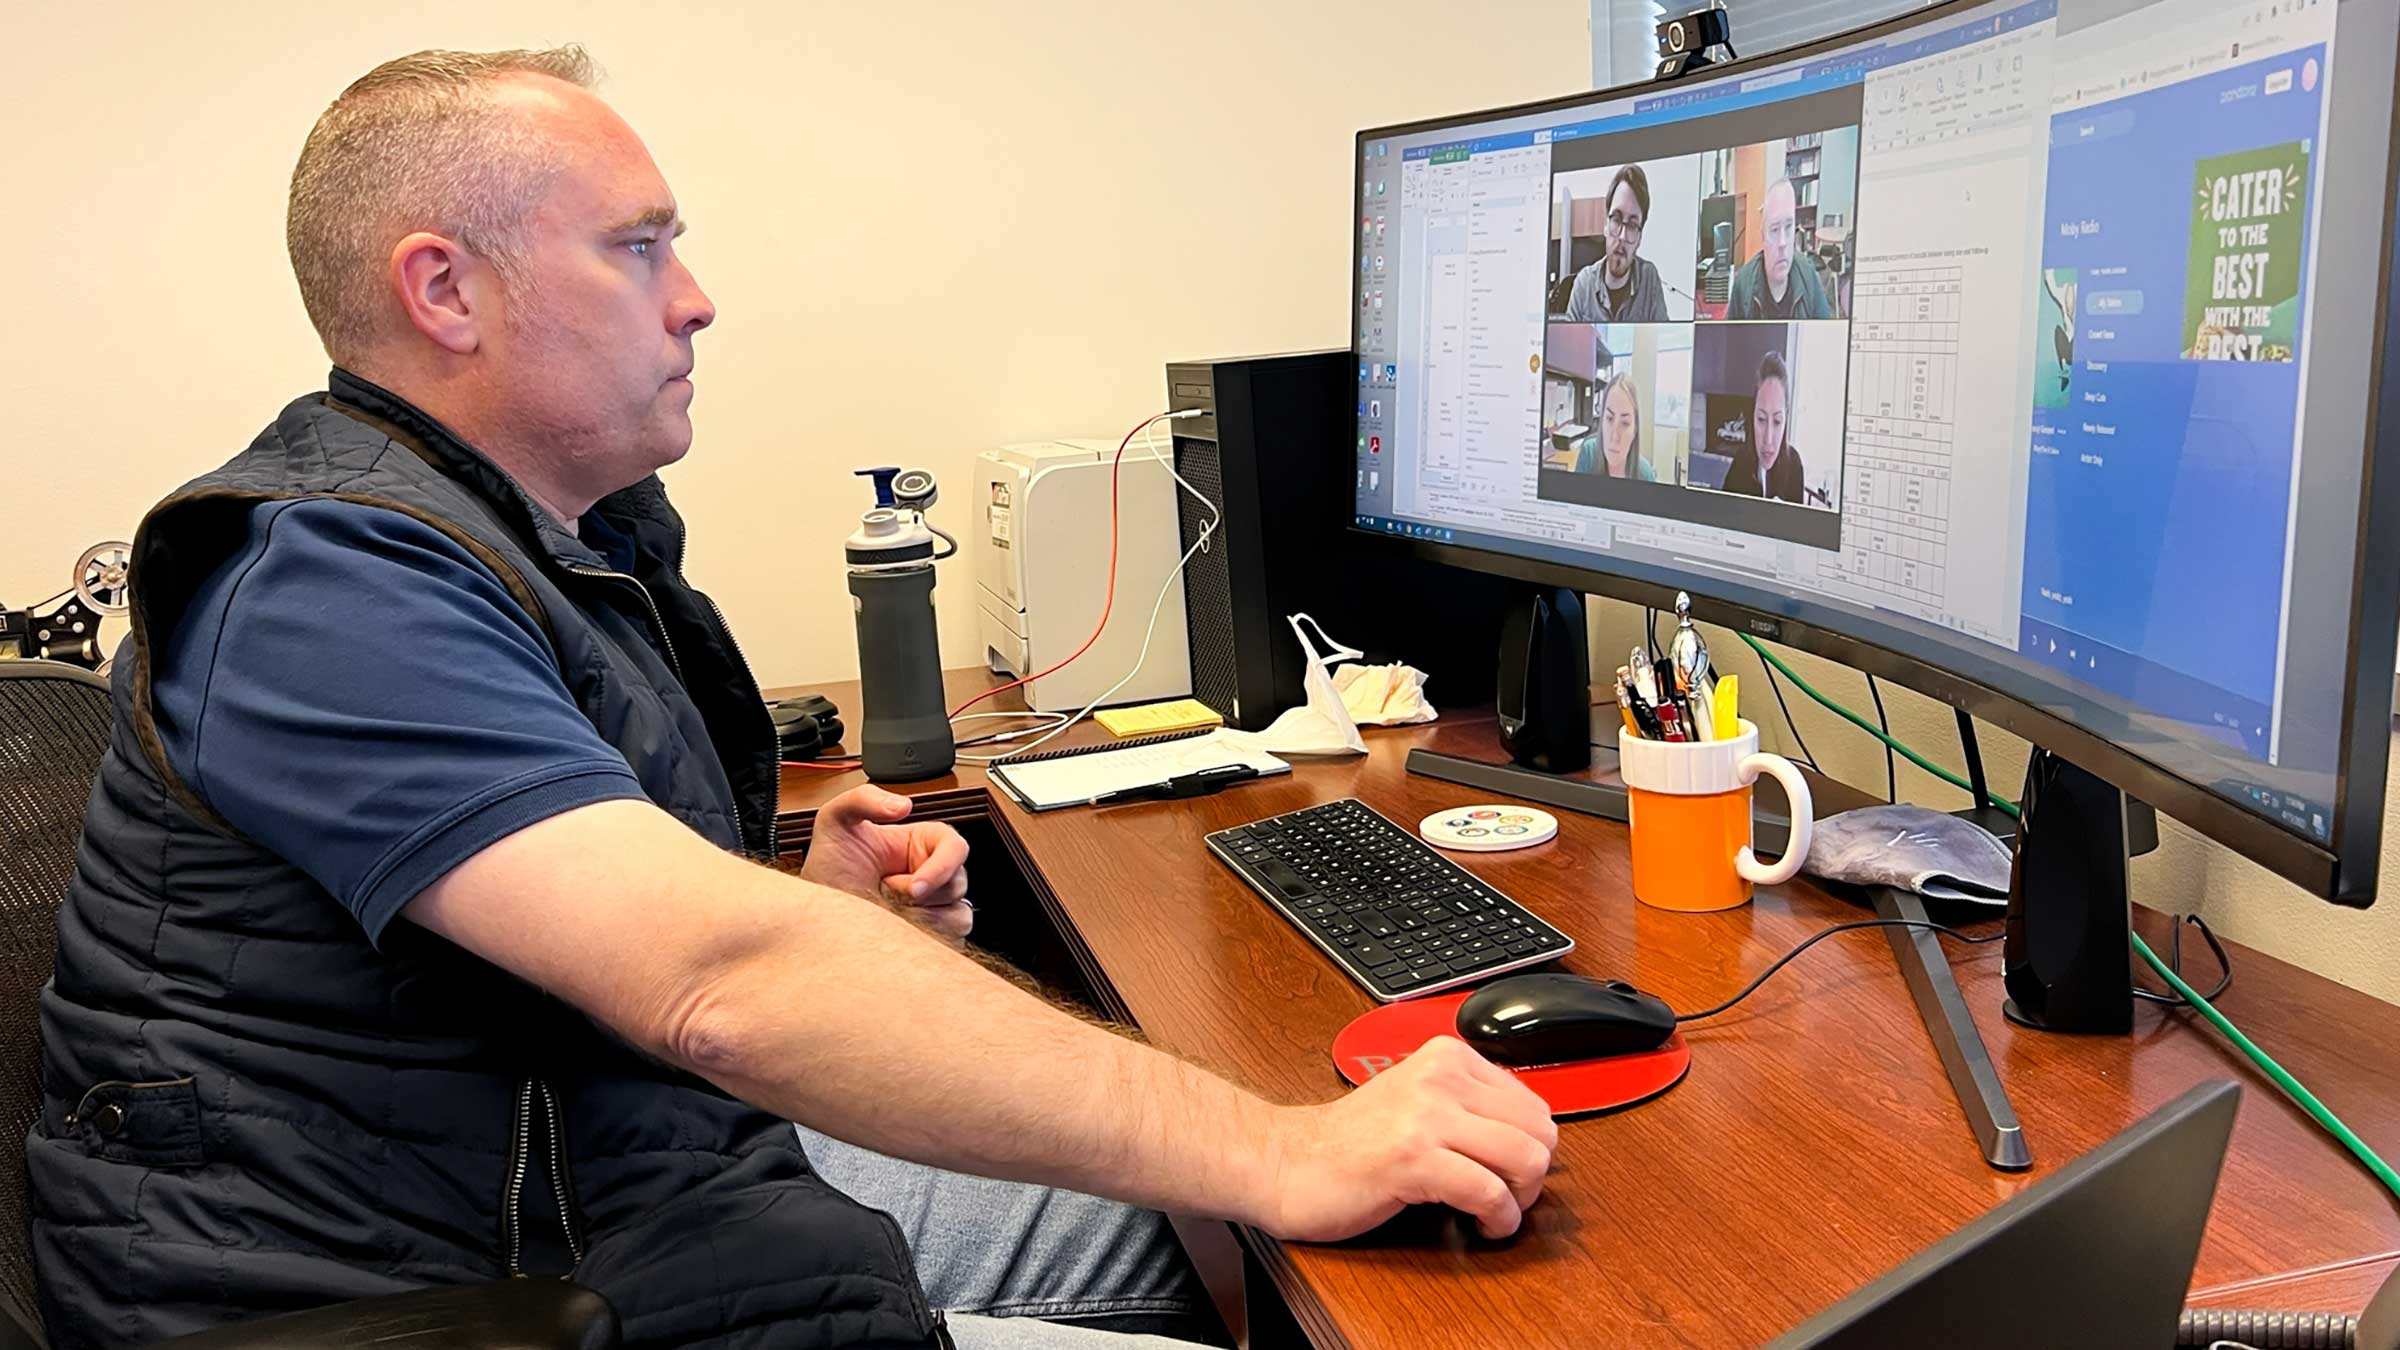 Dr. Bryan on a video conference with his colleagues